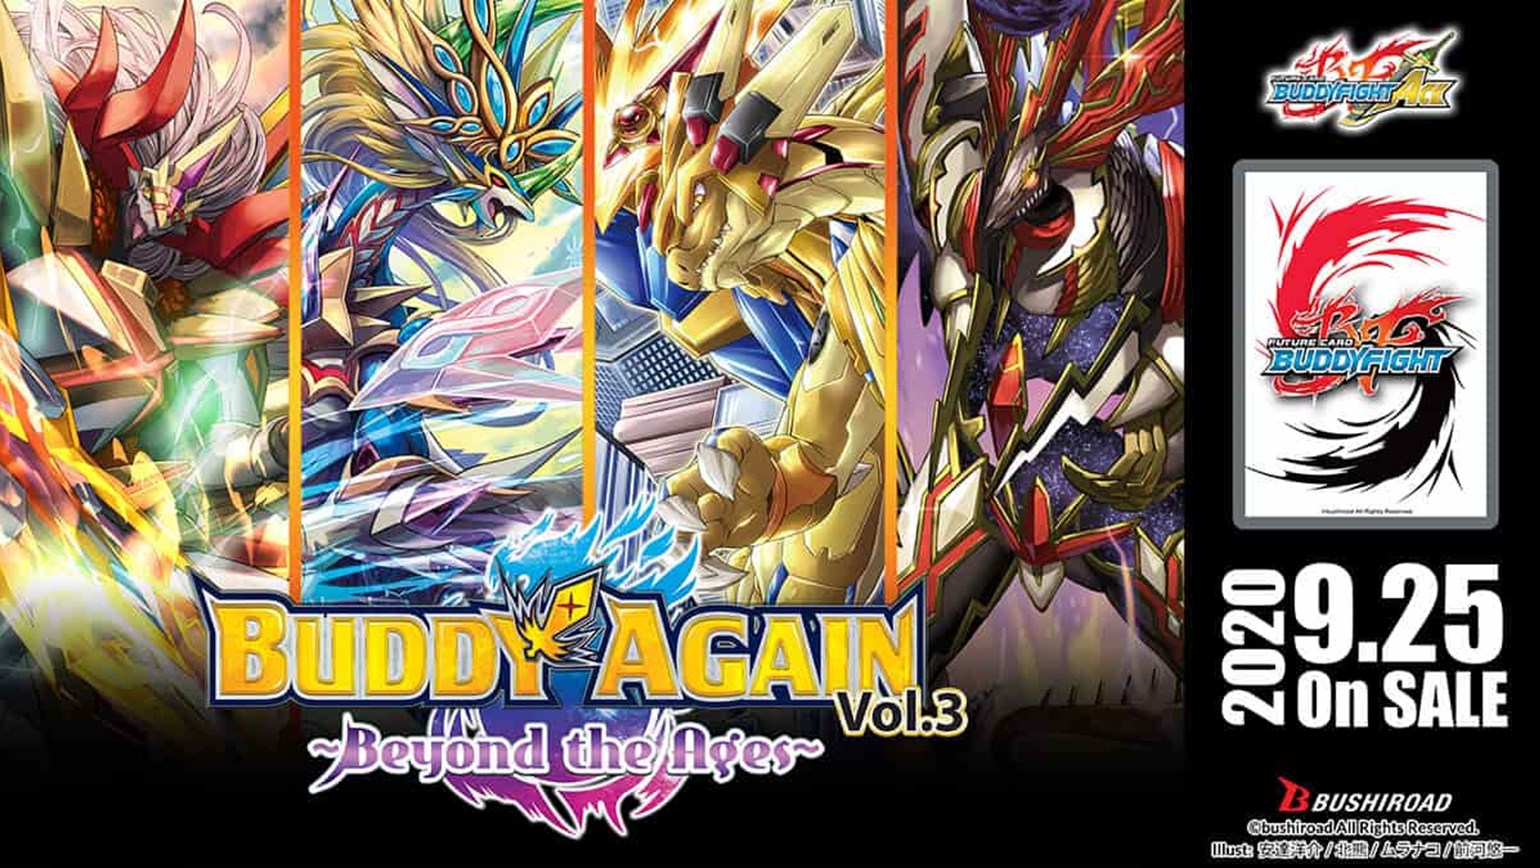 Future Card Buddyfight Ace Ultimate Booster Vol. 6 Buddy Again Vol. 3 Beyond the Ages Coming Sep 25th!